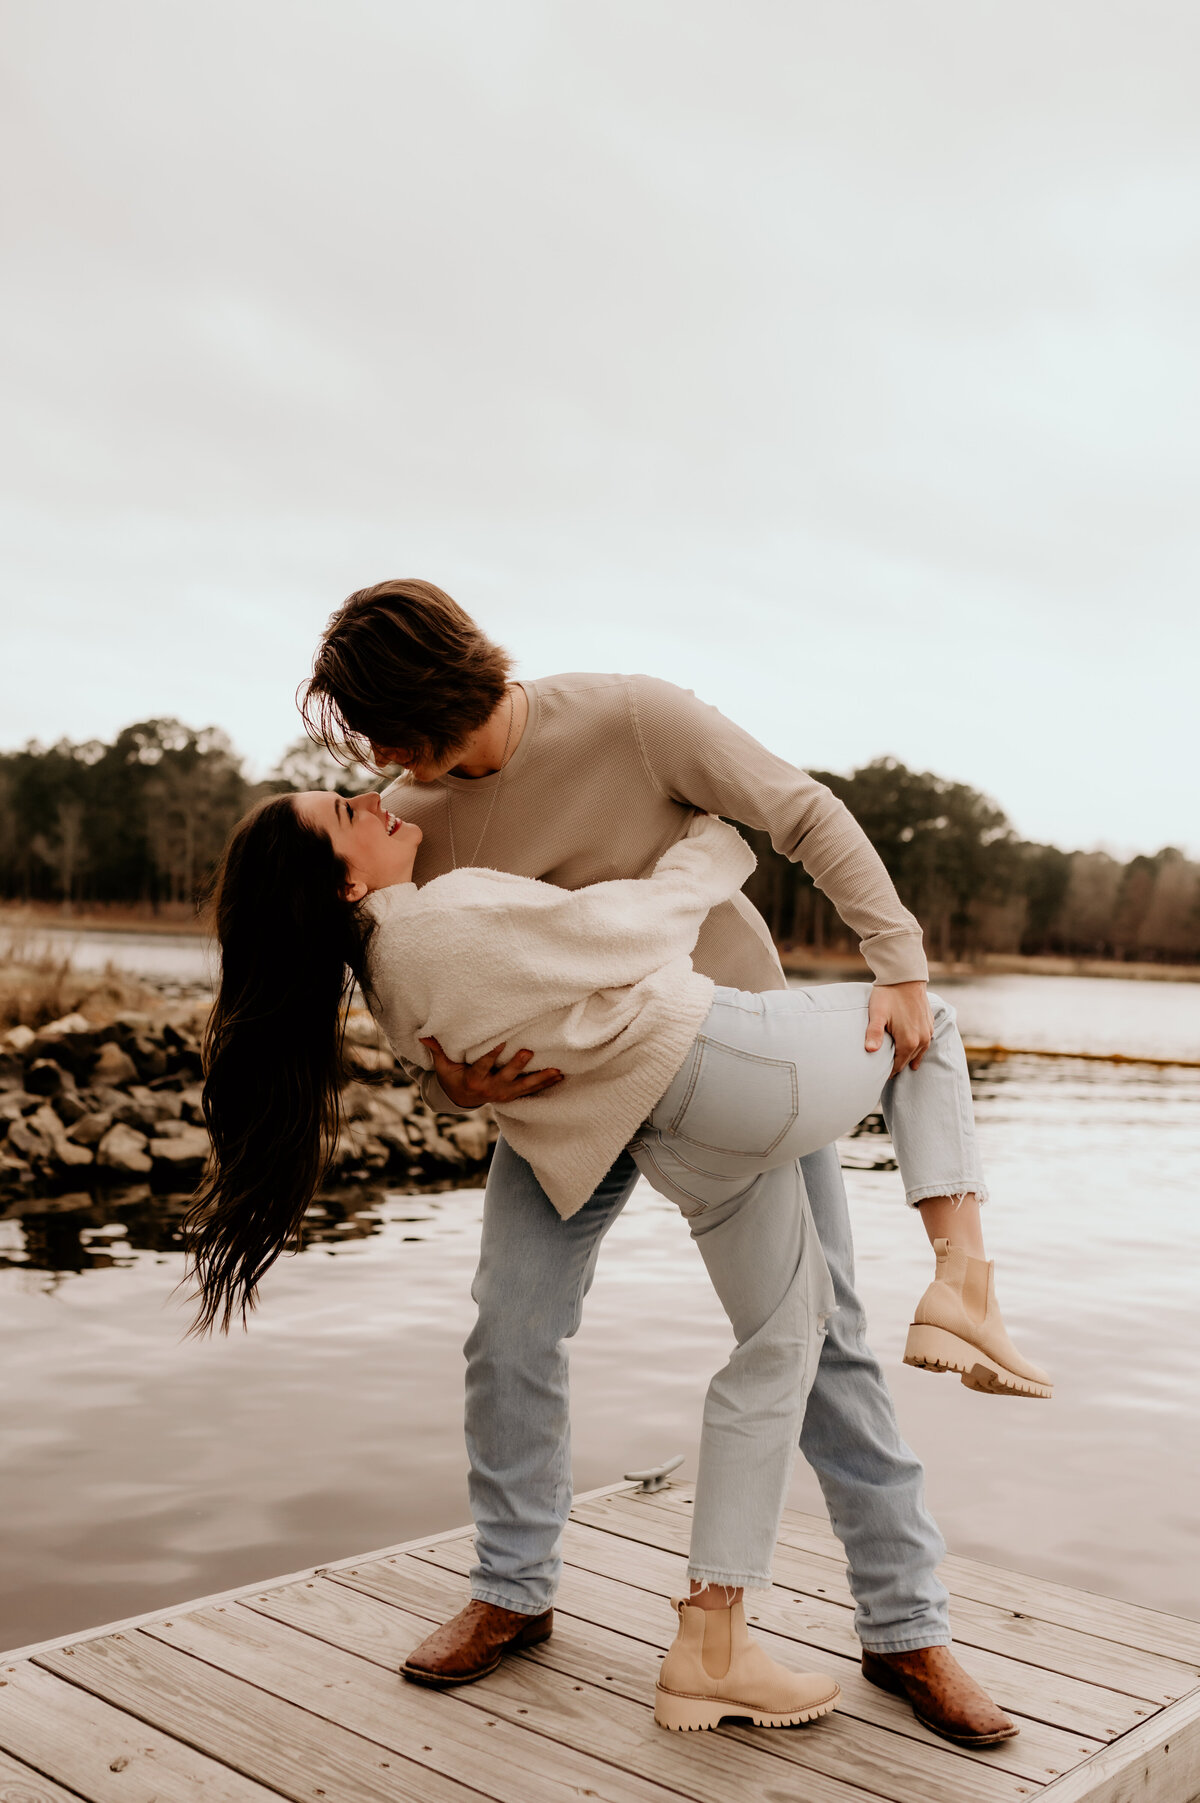 man and woman on a pier on a lake dancing as the man dips the woman back and they laugh together photographed by Little rock engagement photographer